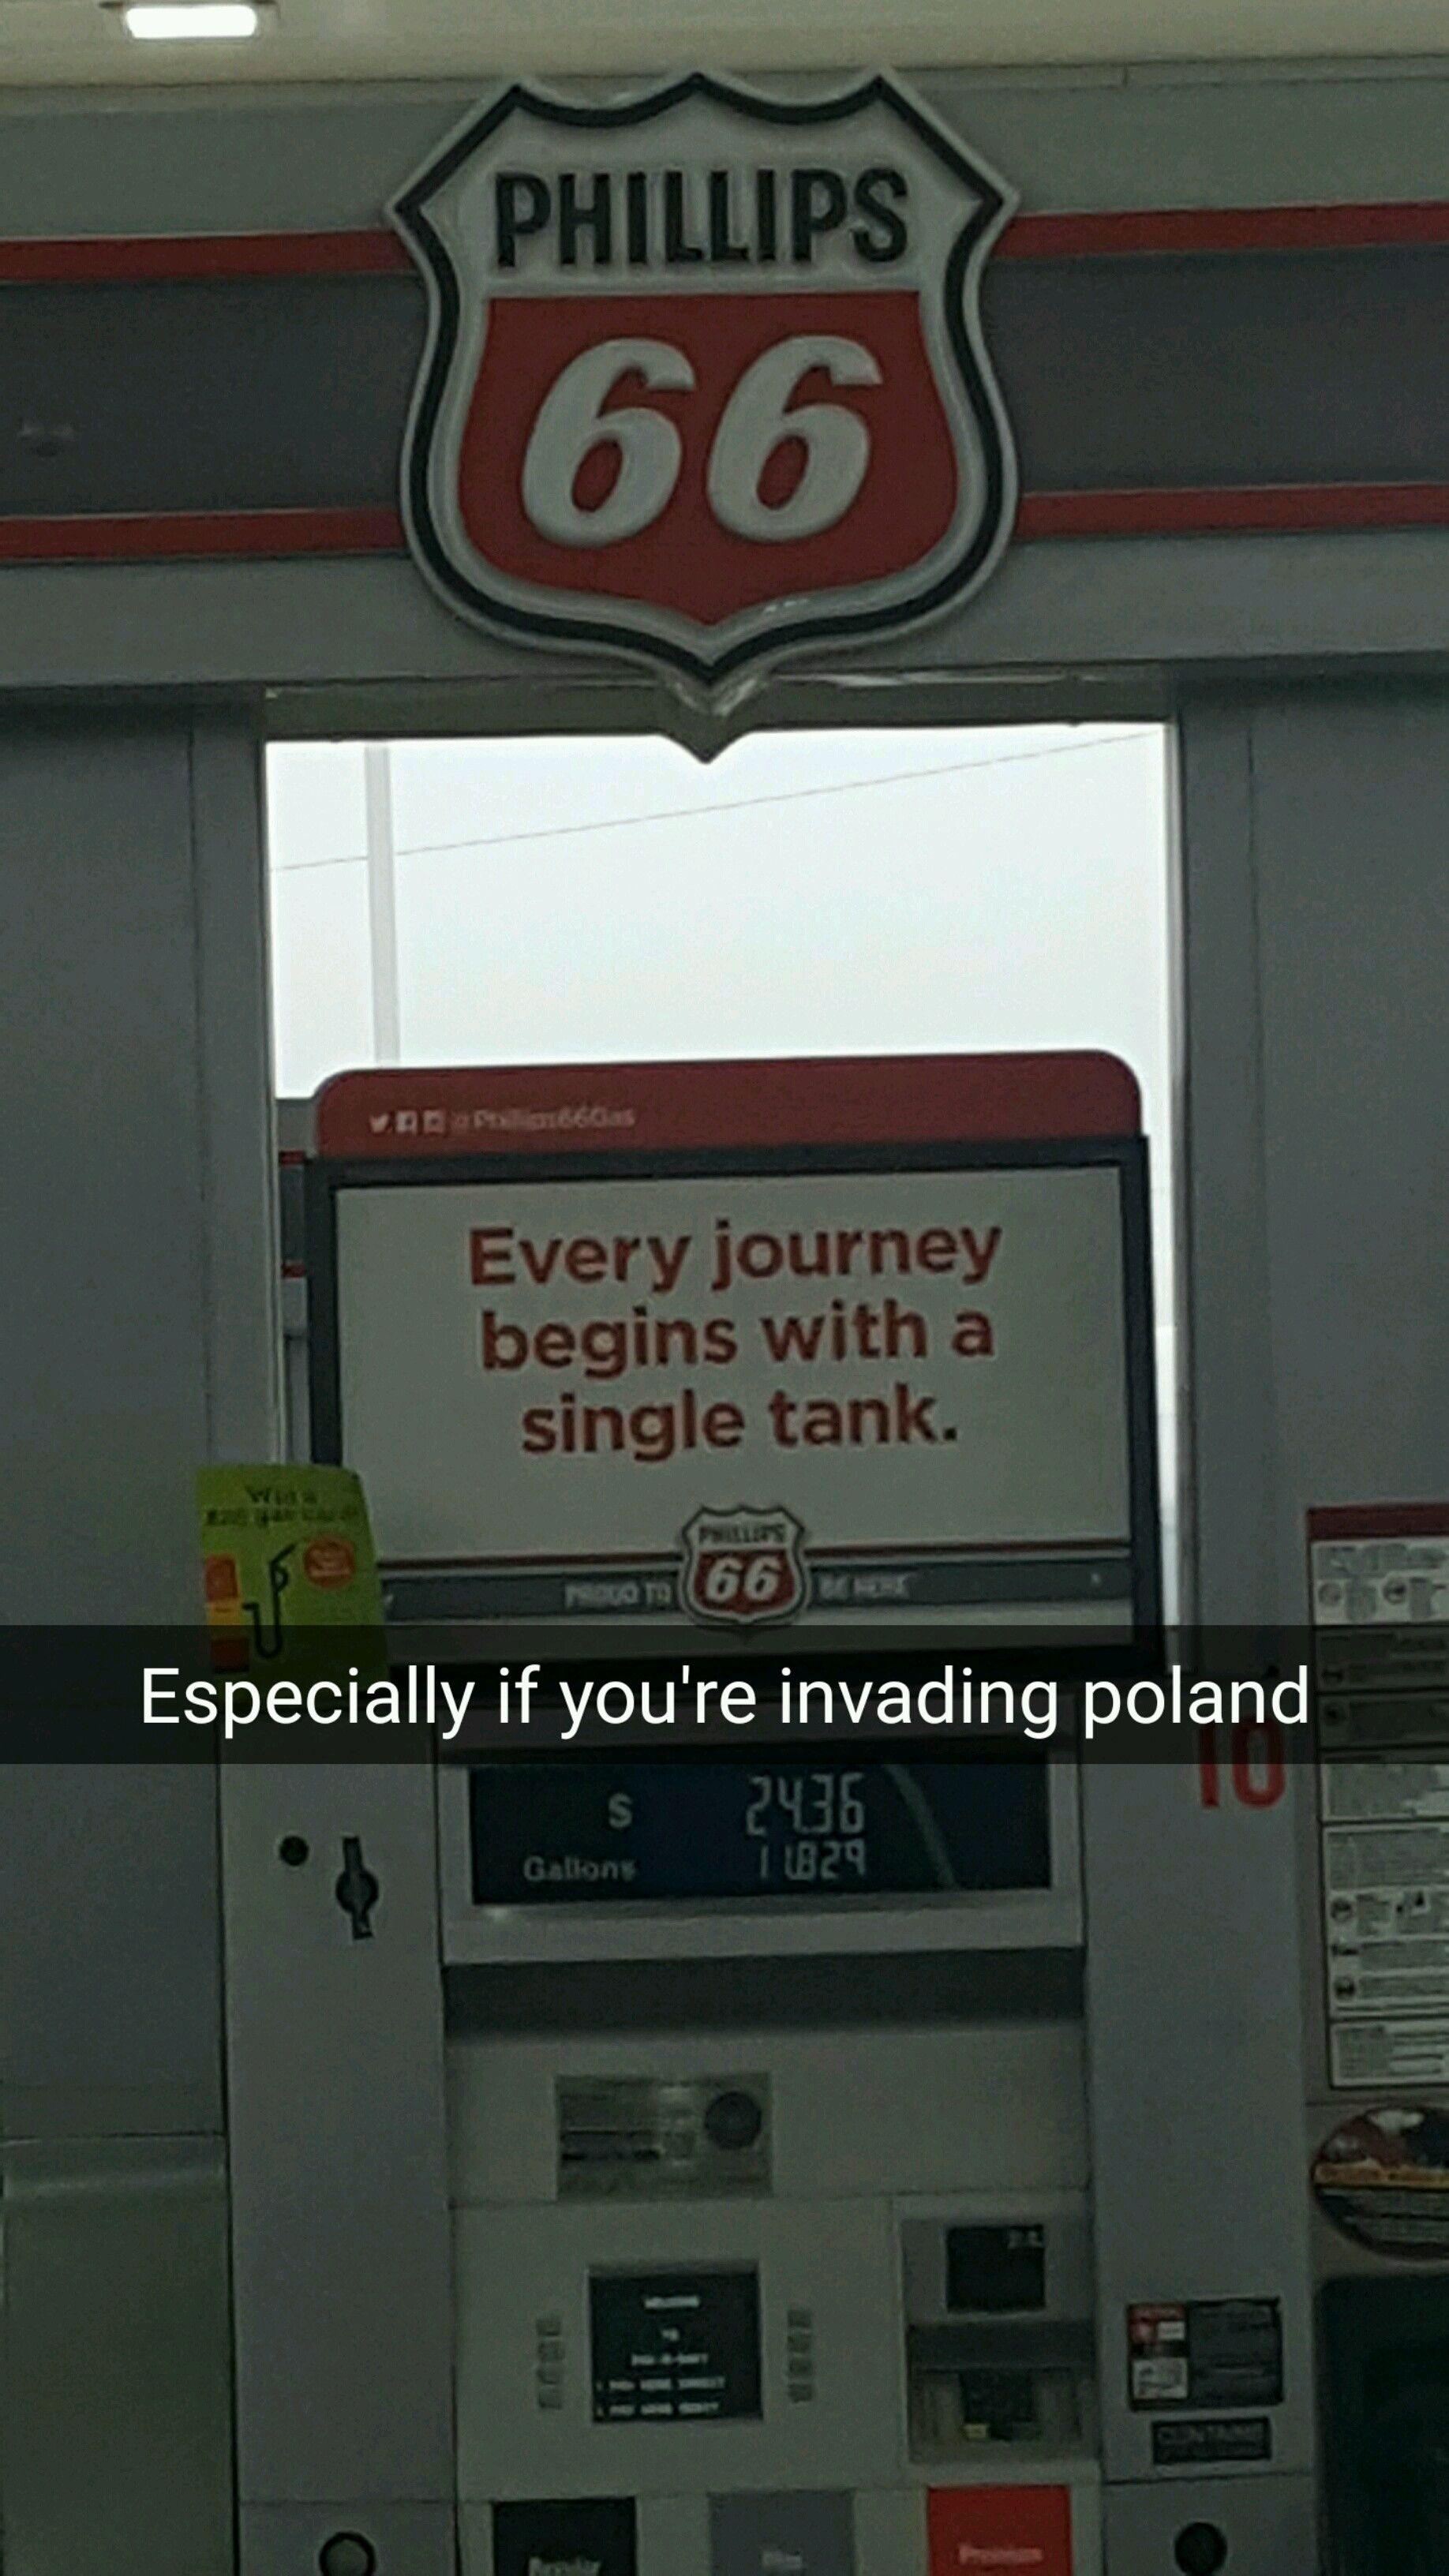 You might even need multiple tanks